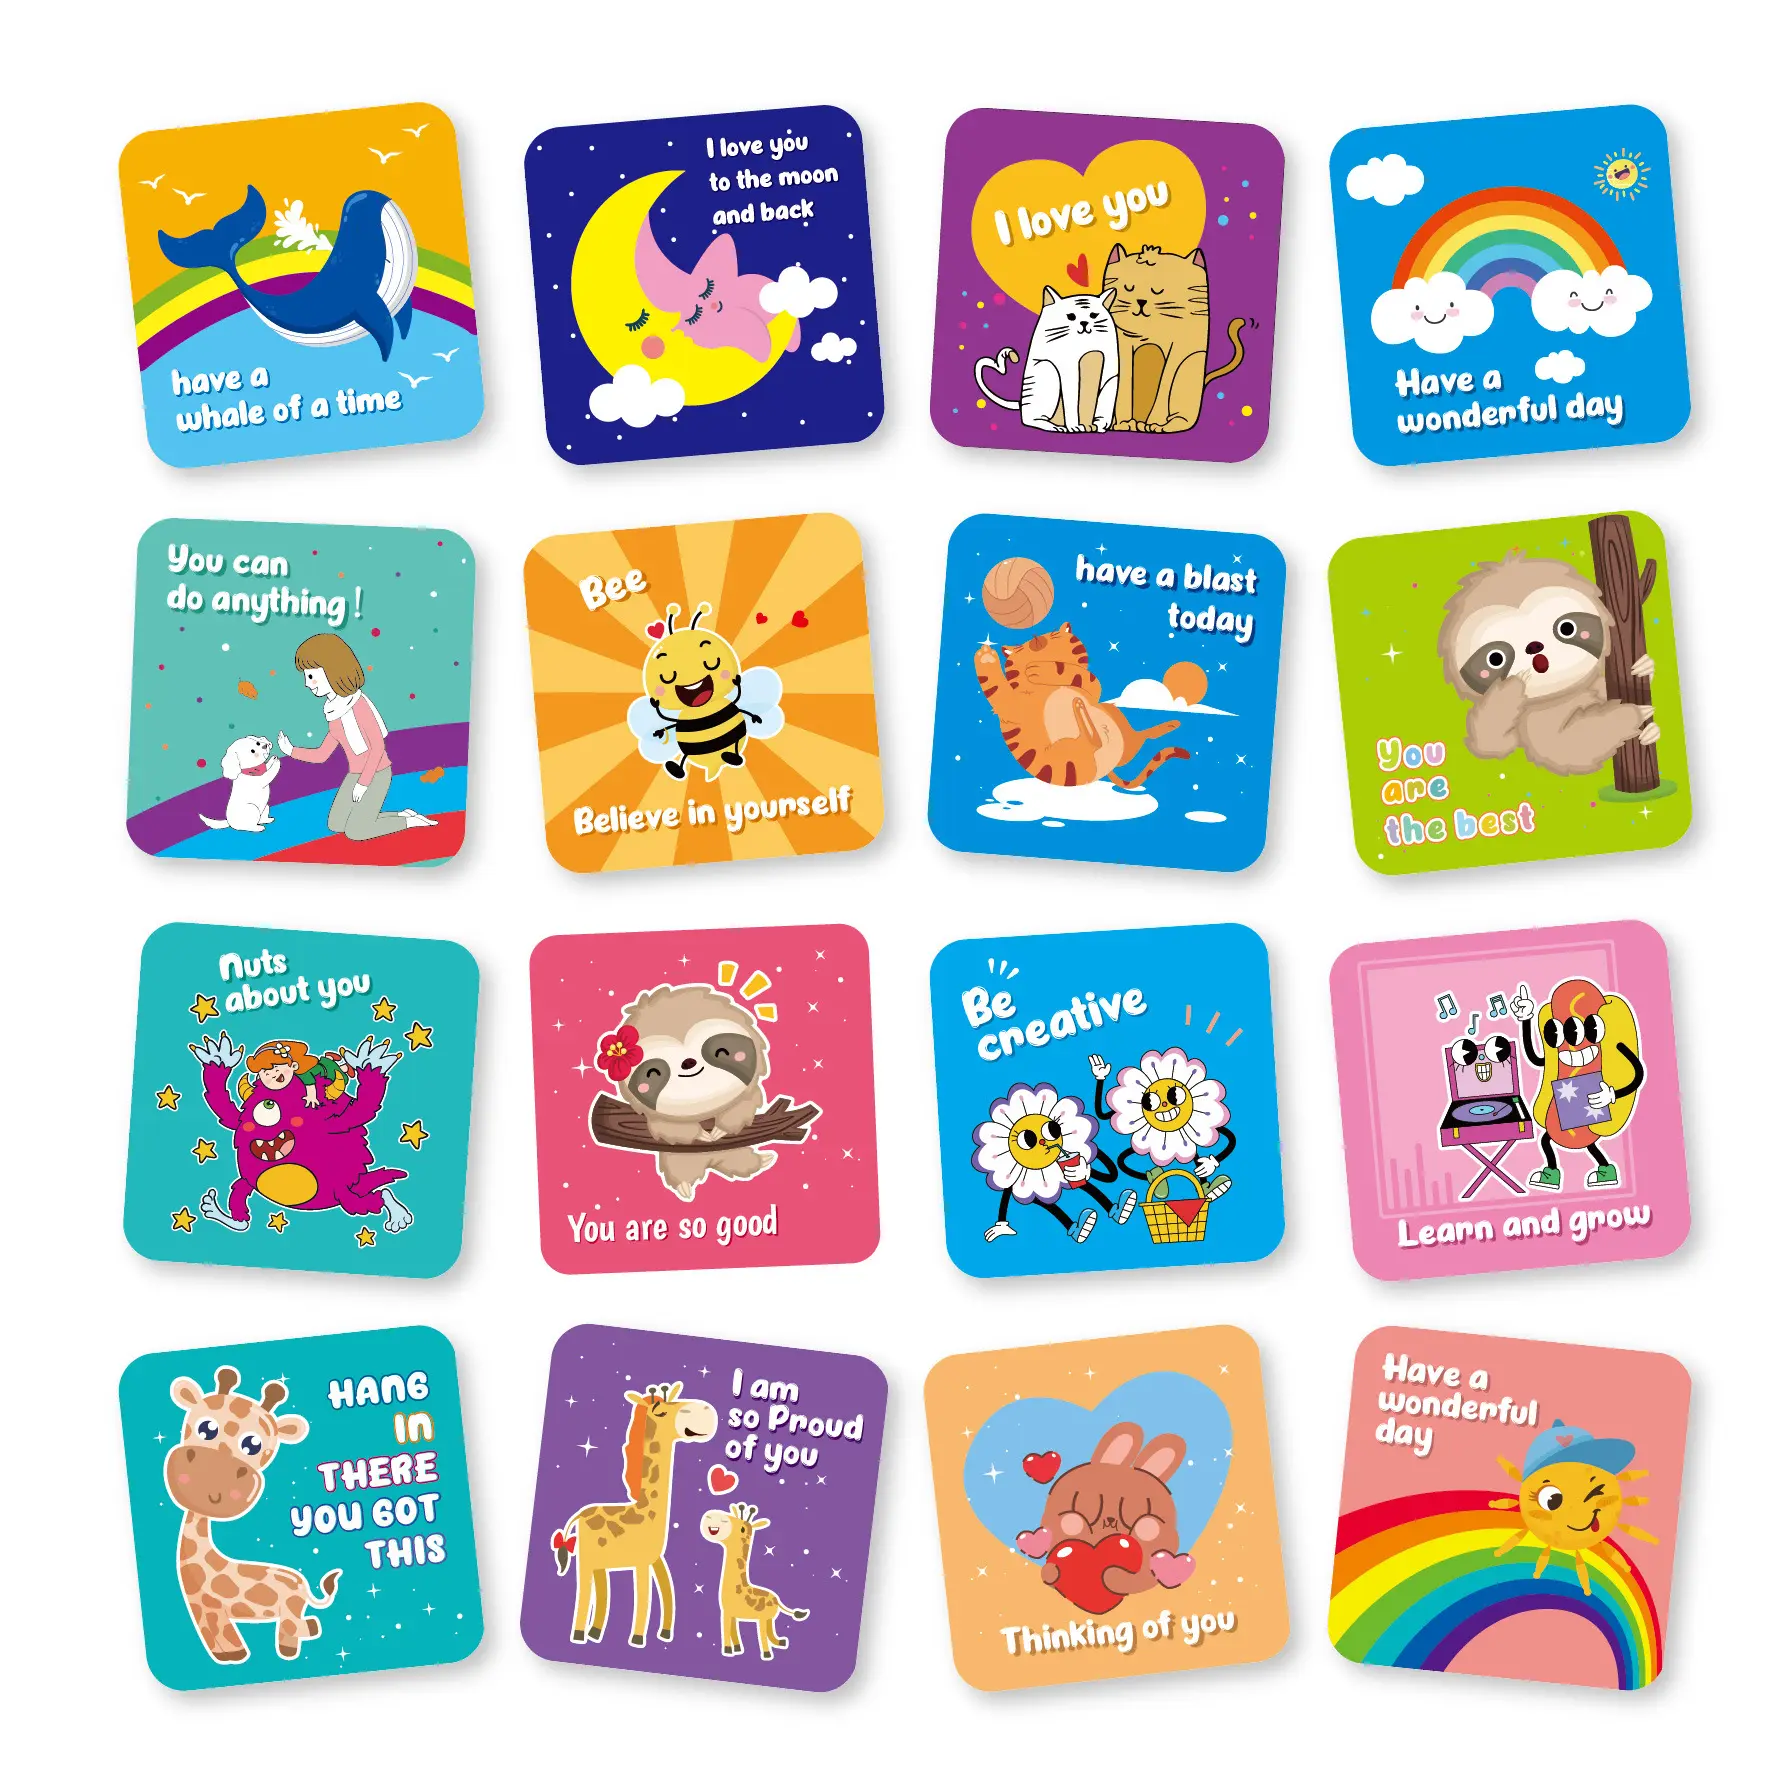 New 60 pcs lunch box notes for kids cute motivational and Inspirational thinking of you cards for boys and girls lunchbox